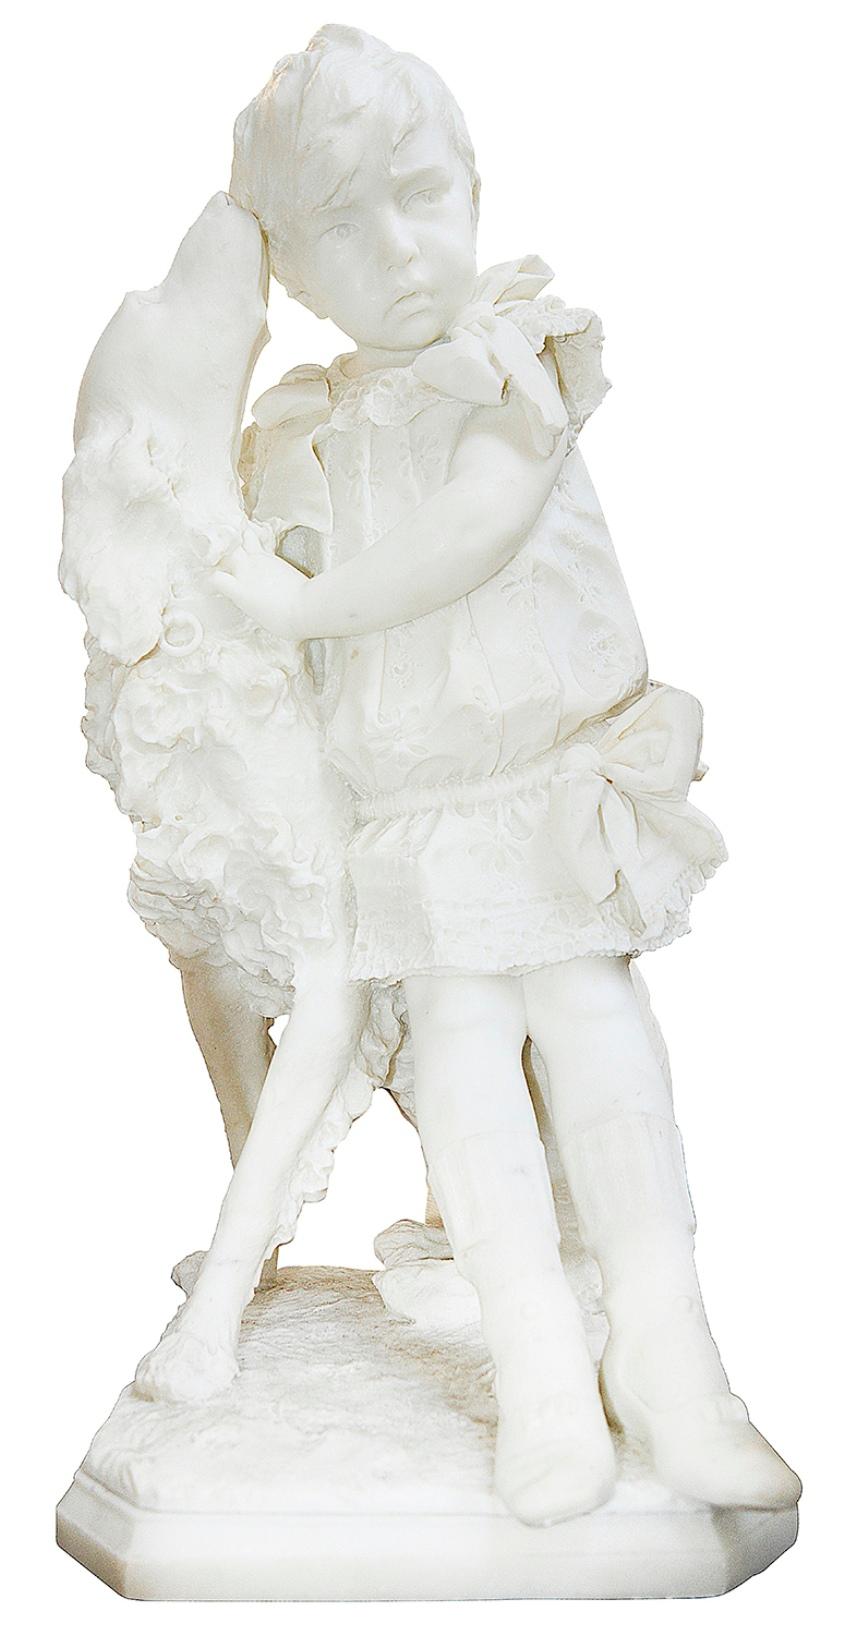 Carrara Marble Enrico Astorri, 19th Century Marble Statue of Young Boy with Dog For Sale